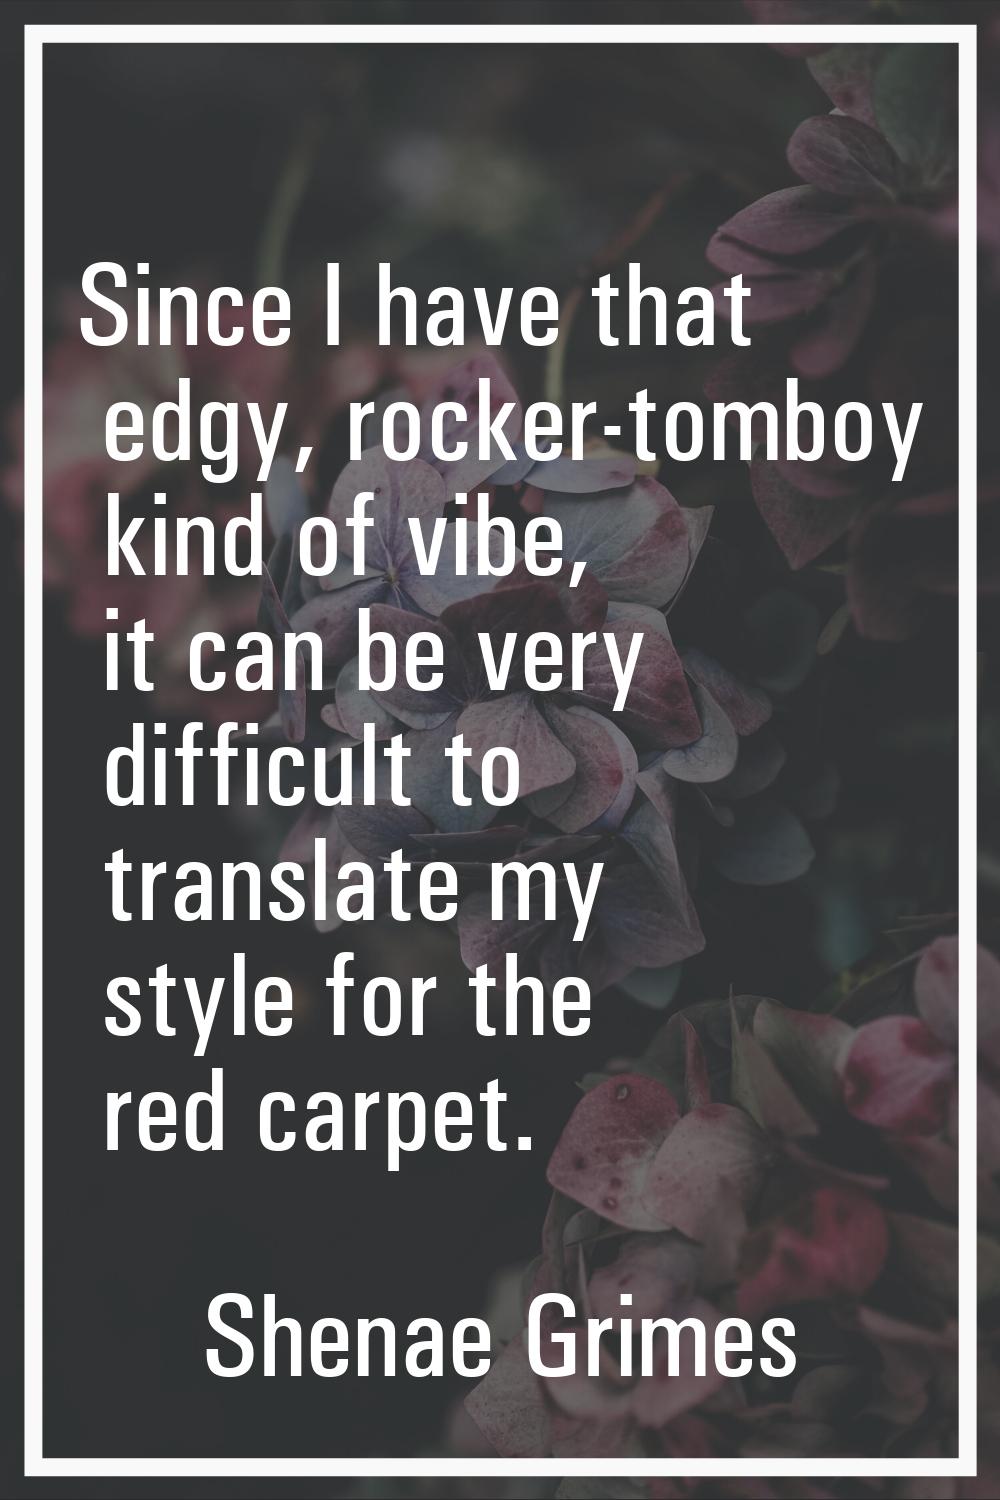 Since I have that edgy, rocker-tomboy kind of vibe, it can be very difficult to translate my style 